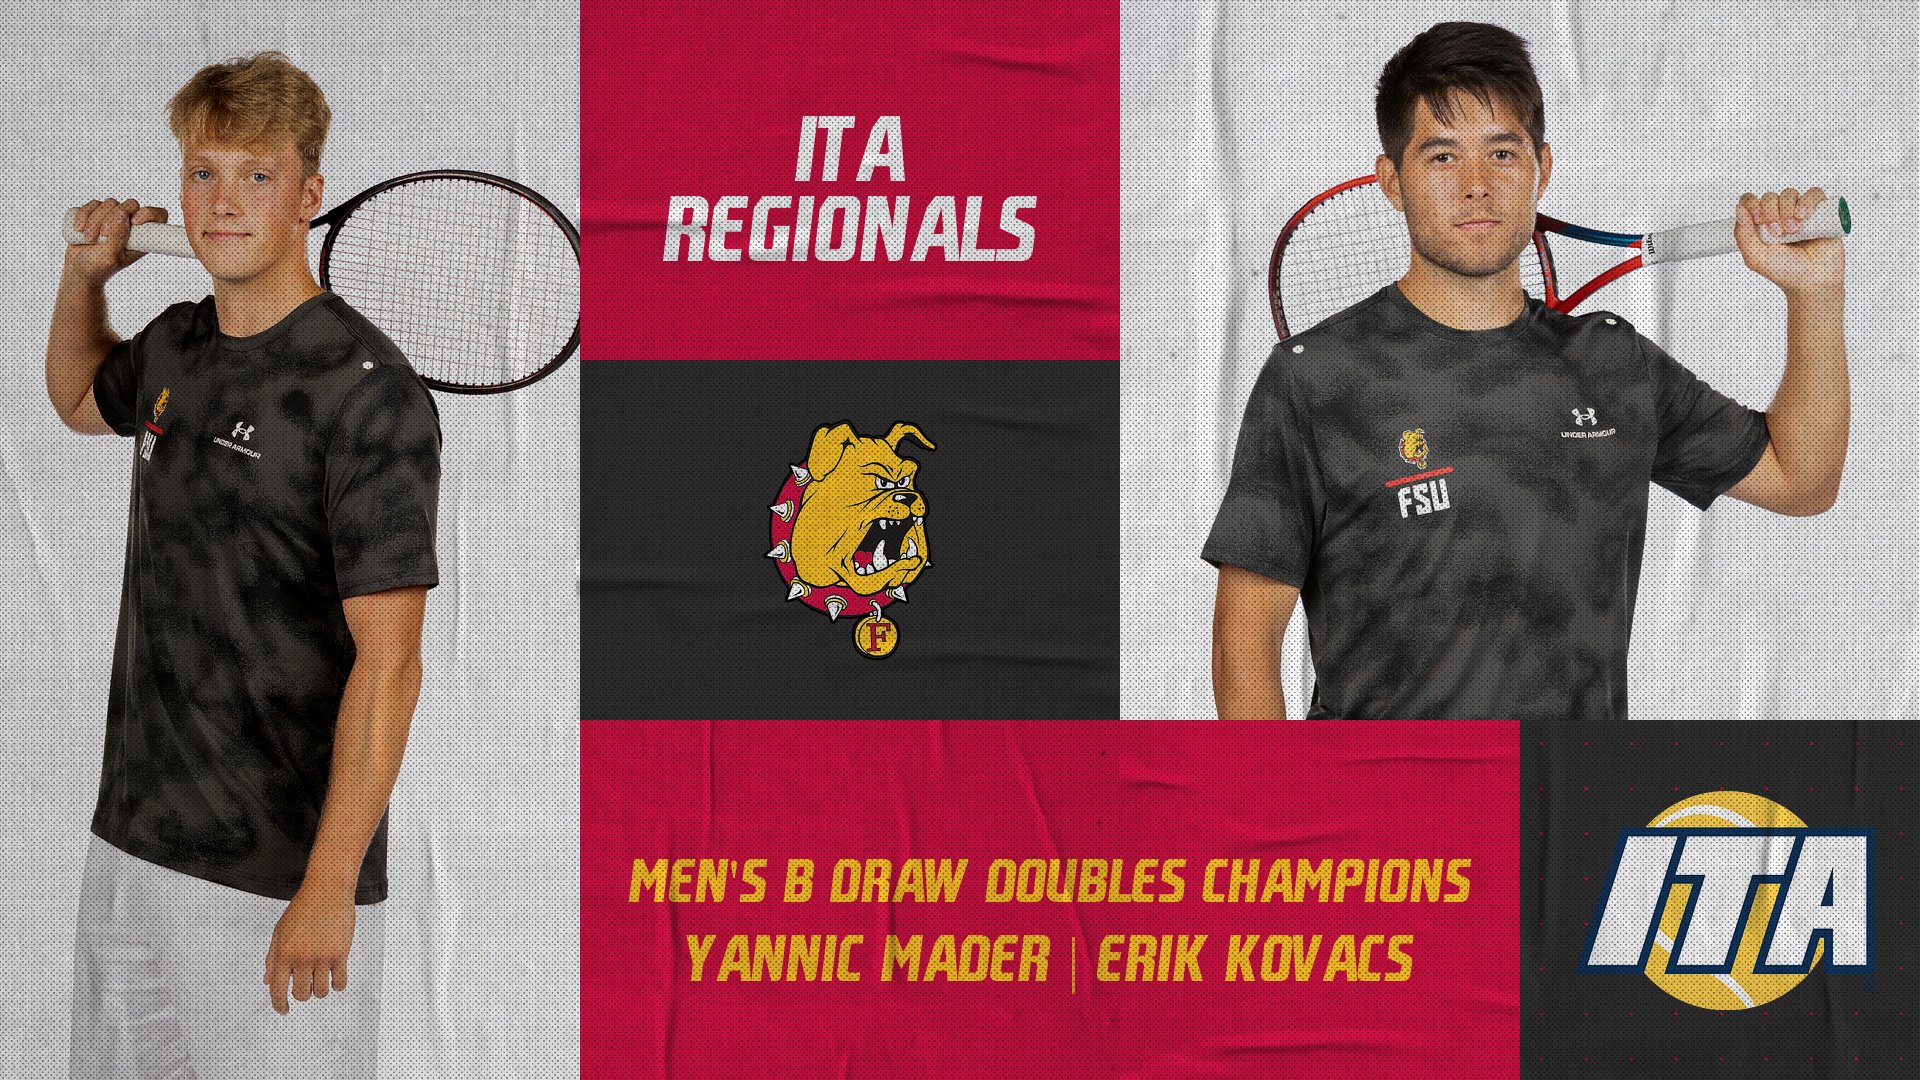 Ferris State Duo Claims Doubles B Draw Championship At ITA Regionals